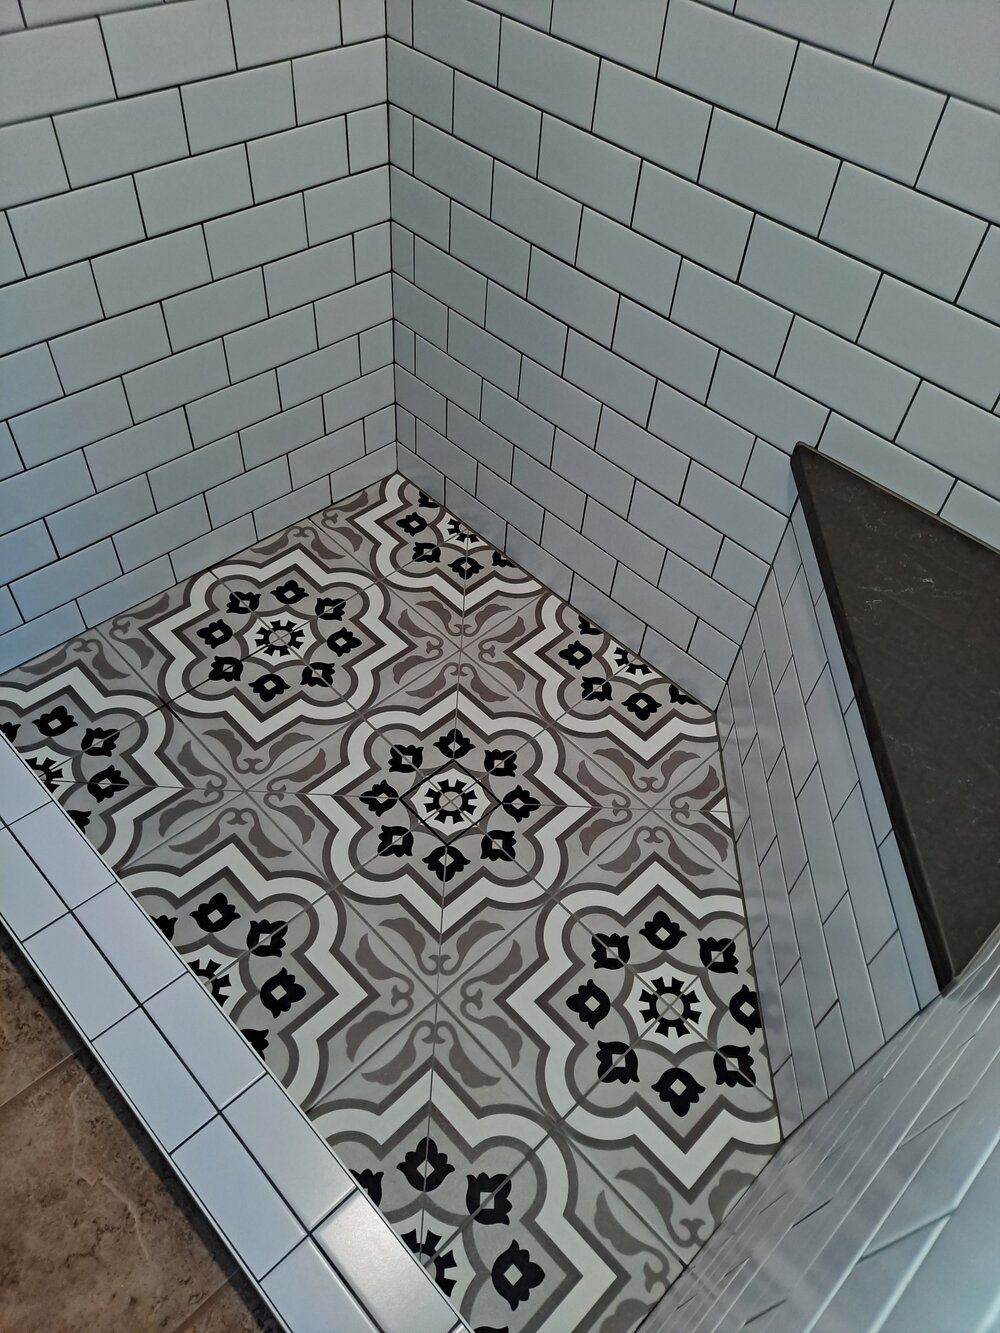 Ceramic Tile & Porcelain Tile: What's The Difference?